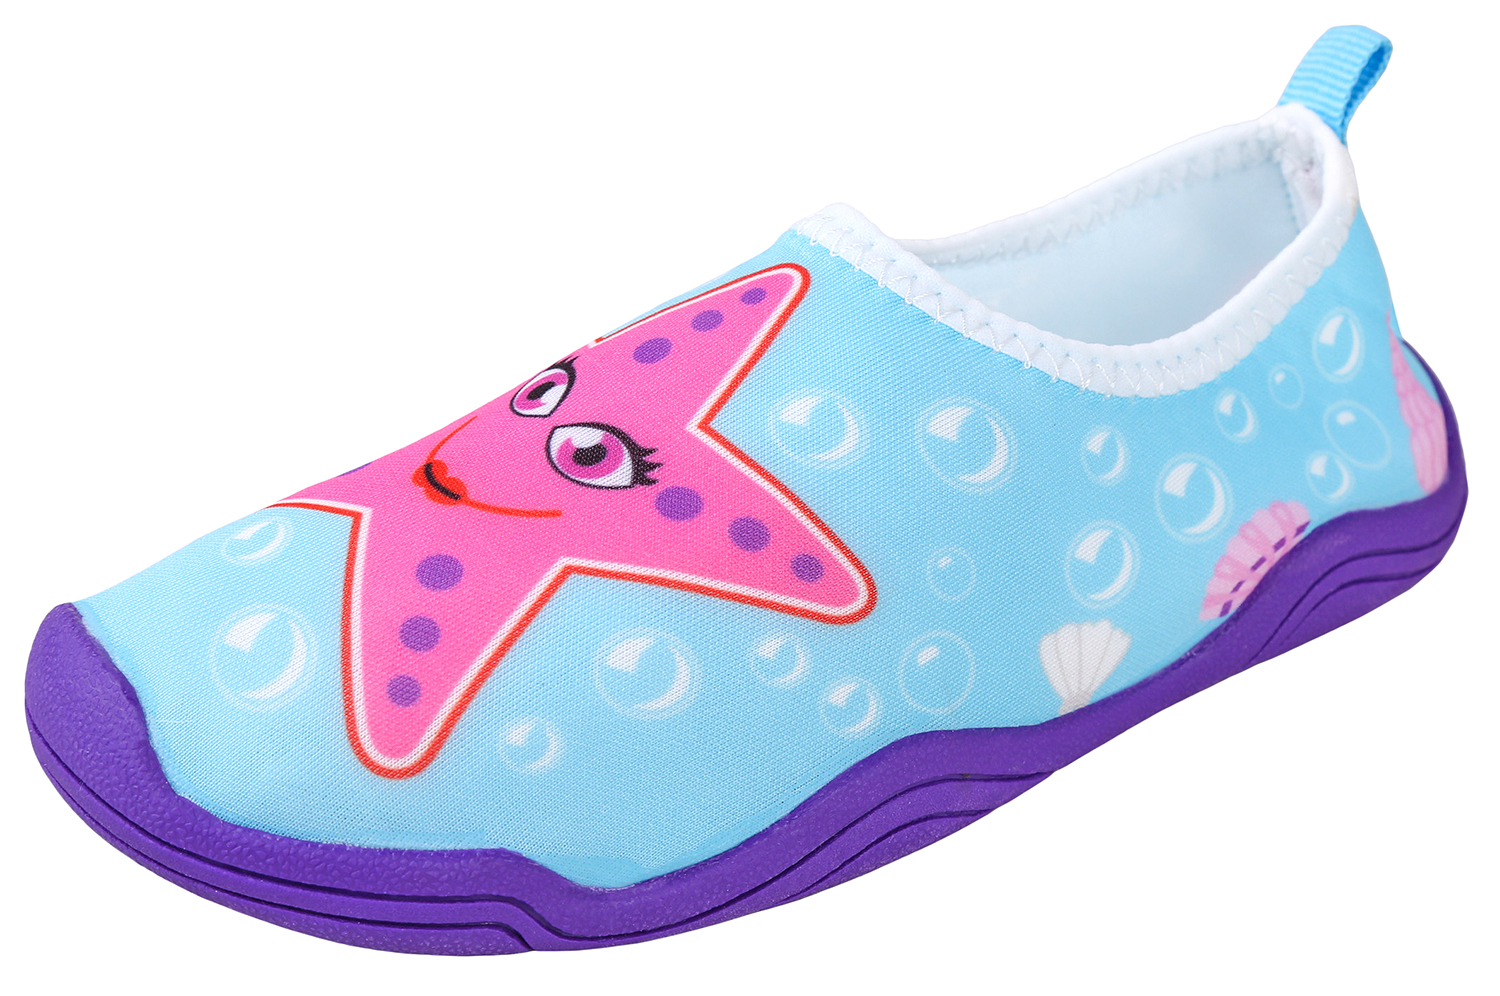 Lil' Fins Kids Water Shoes - Beach Shoes | Summer Fun | 3D Toddler Water Shoes Kids | Quick Dry | Swim Shoes Starfish 6/7 M US - image 1 of 5